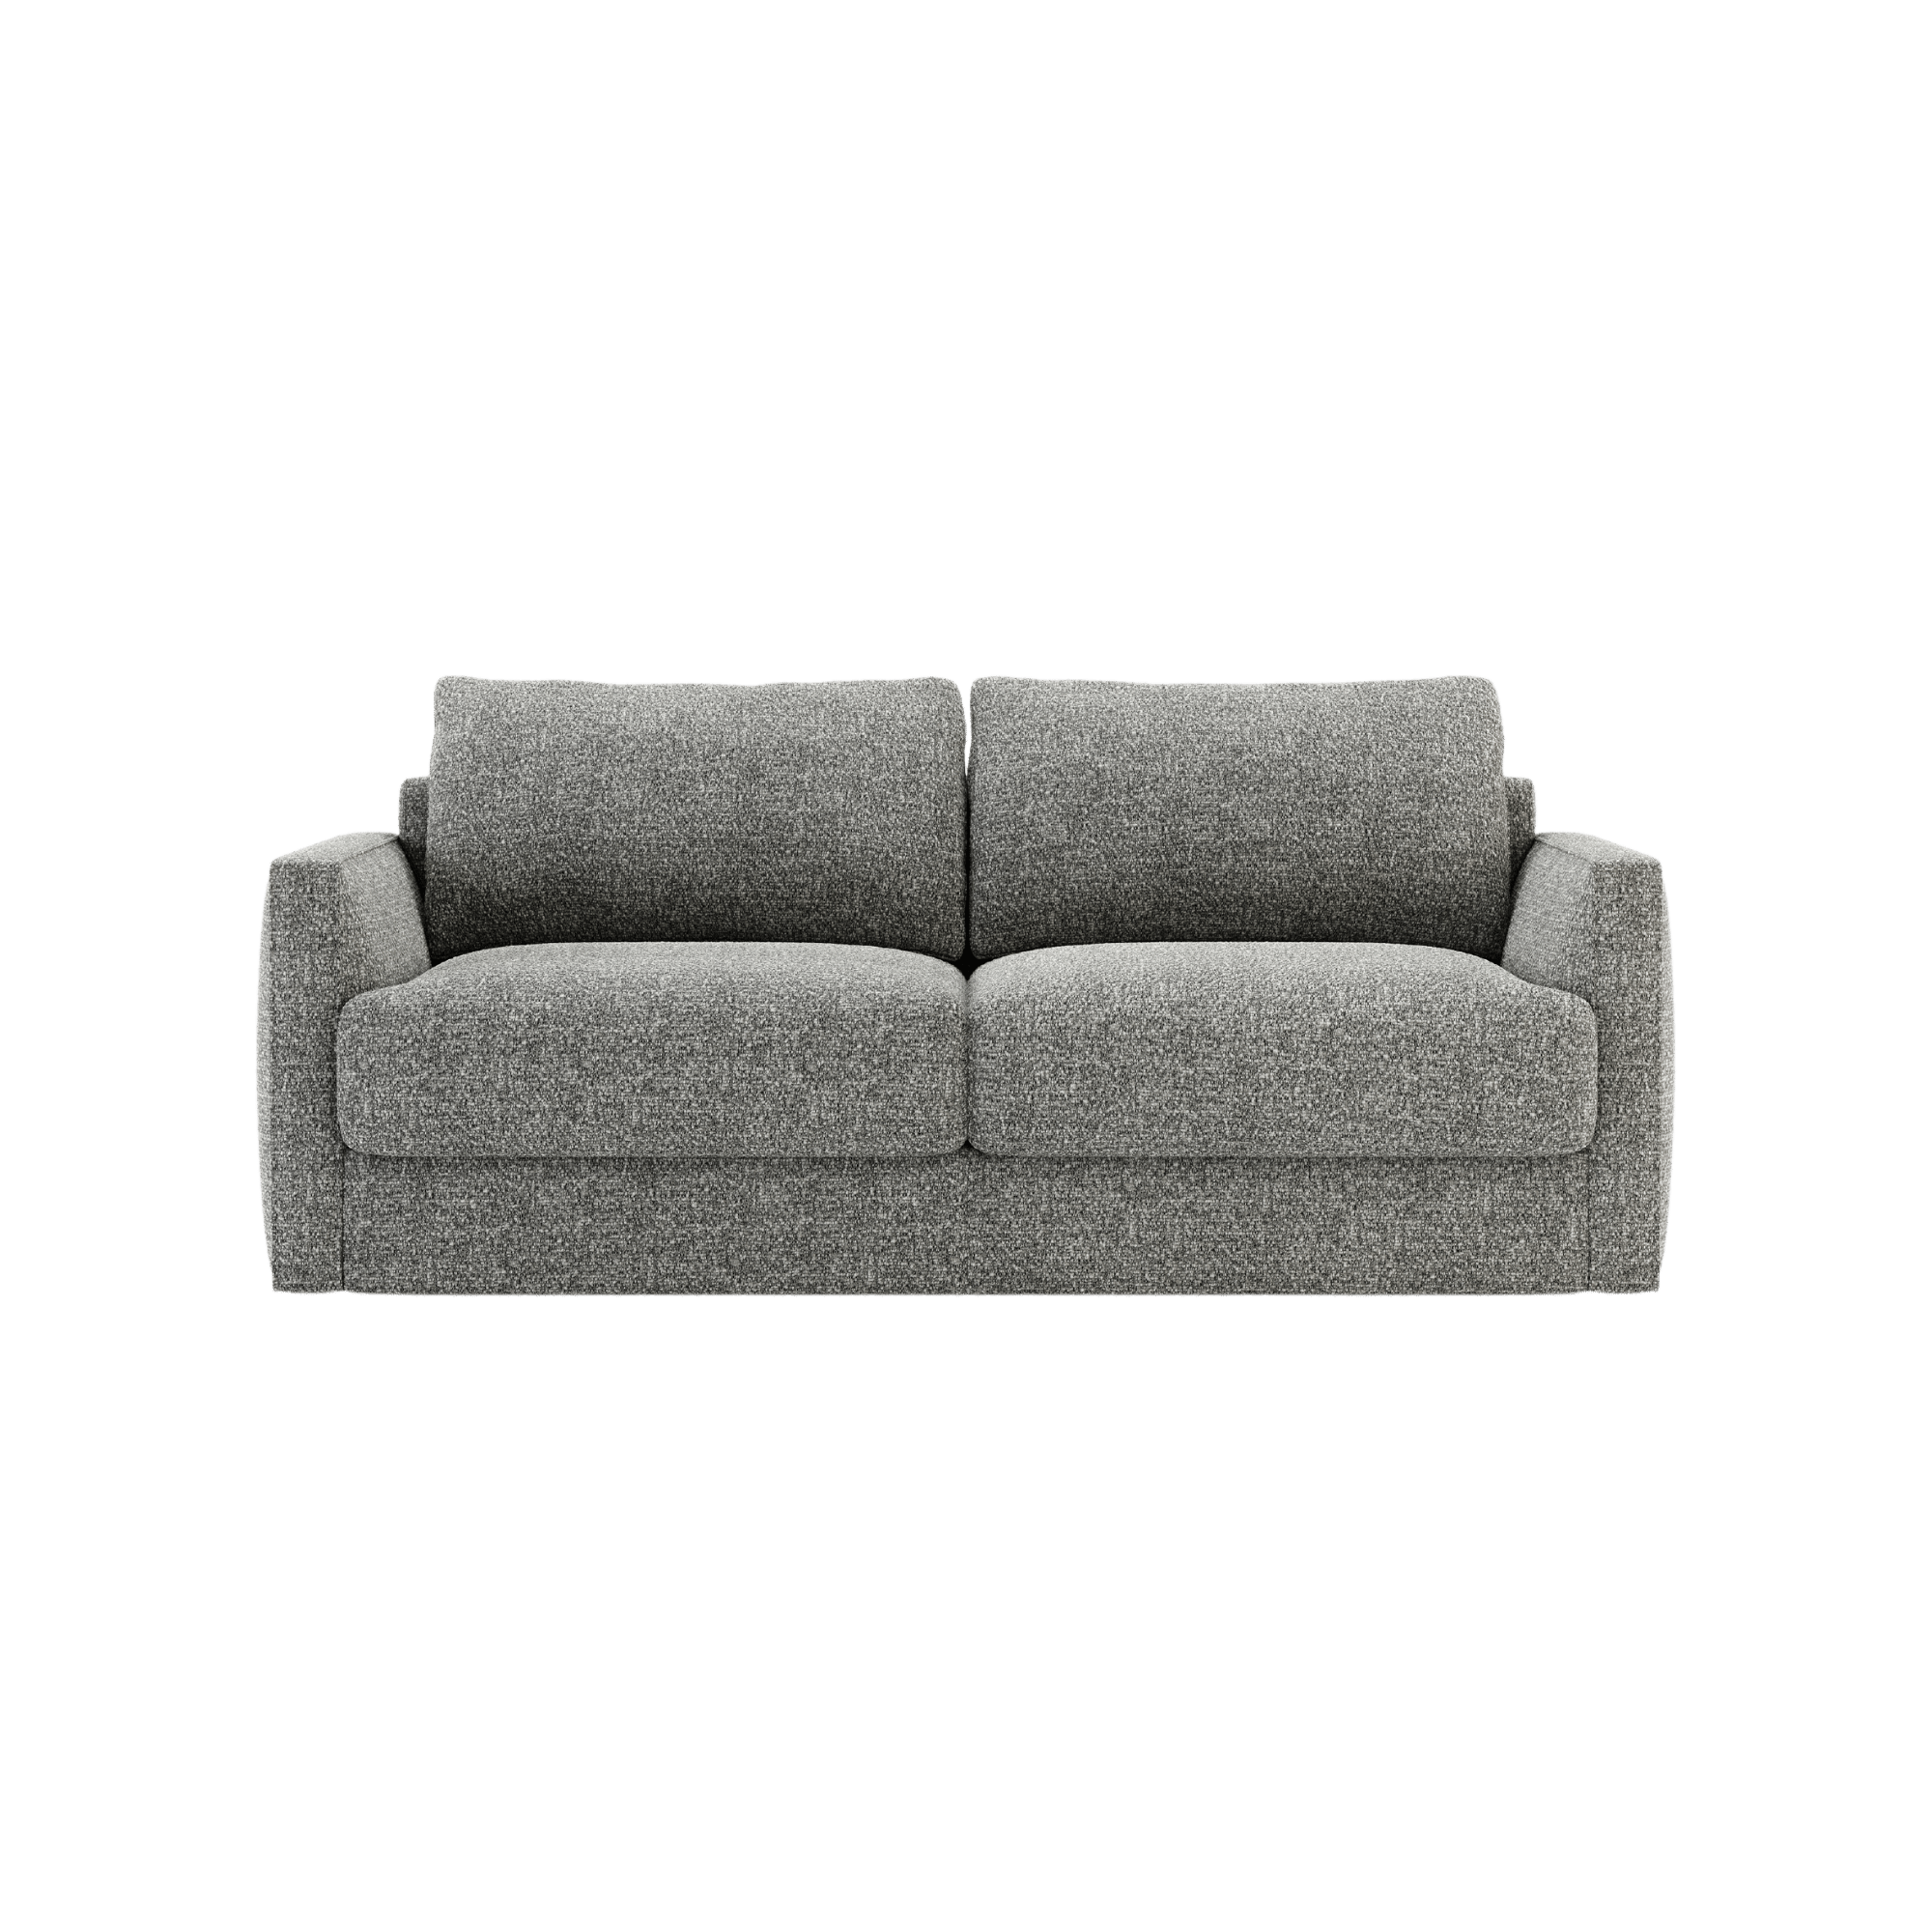 Beaumont Bed Sofa